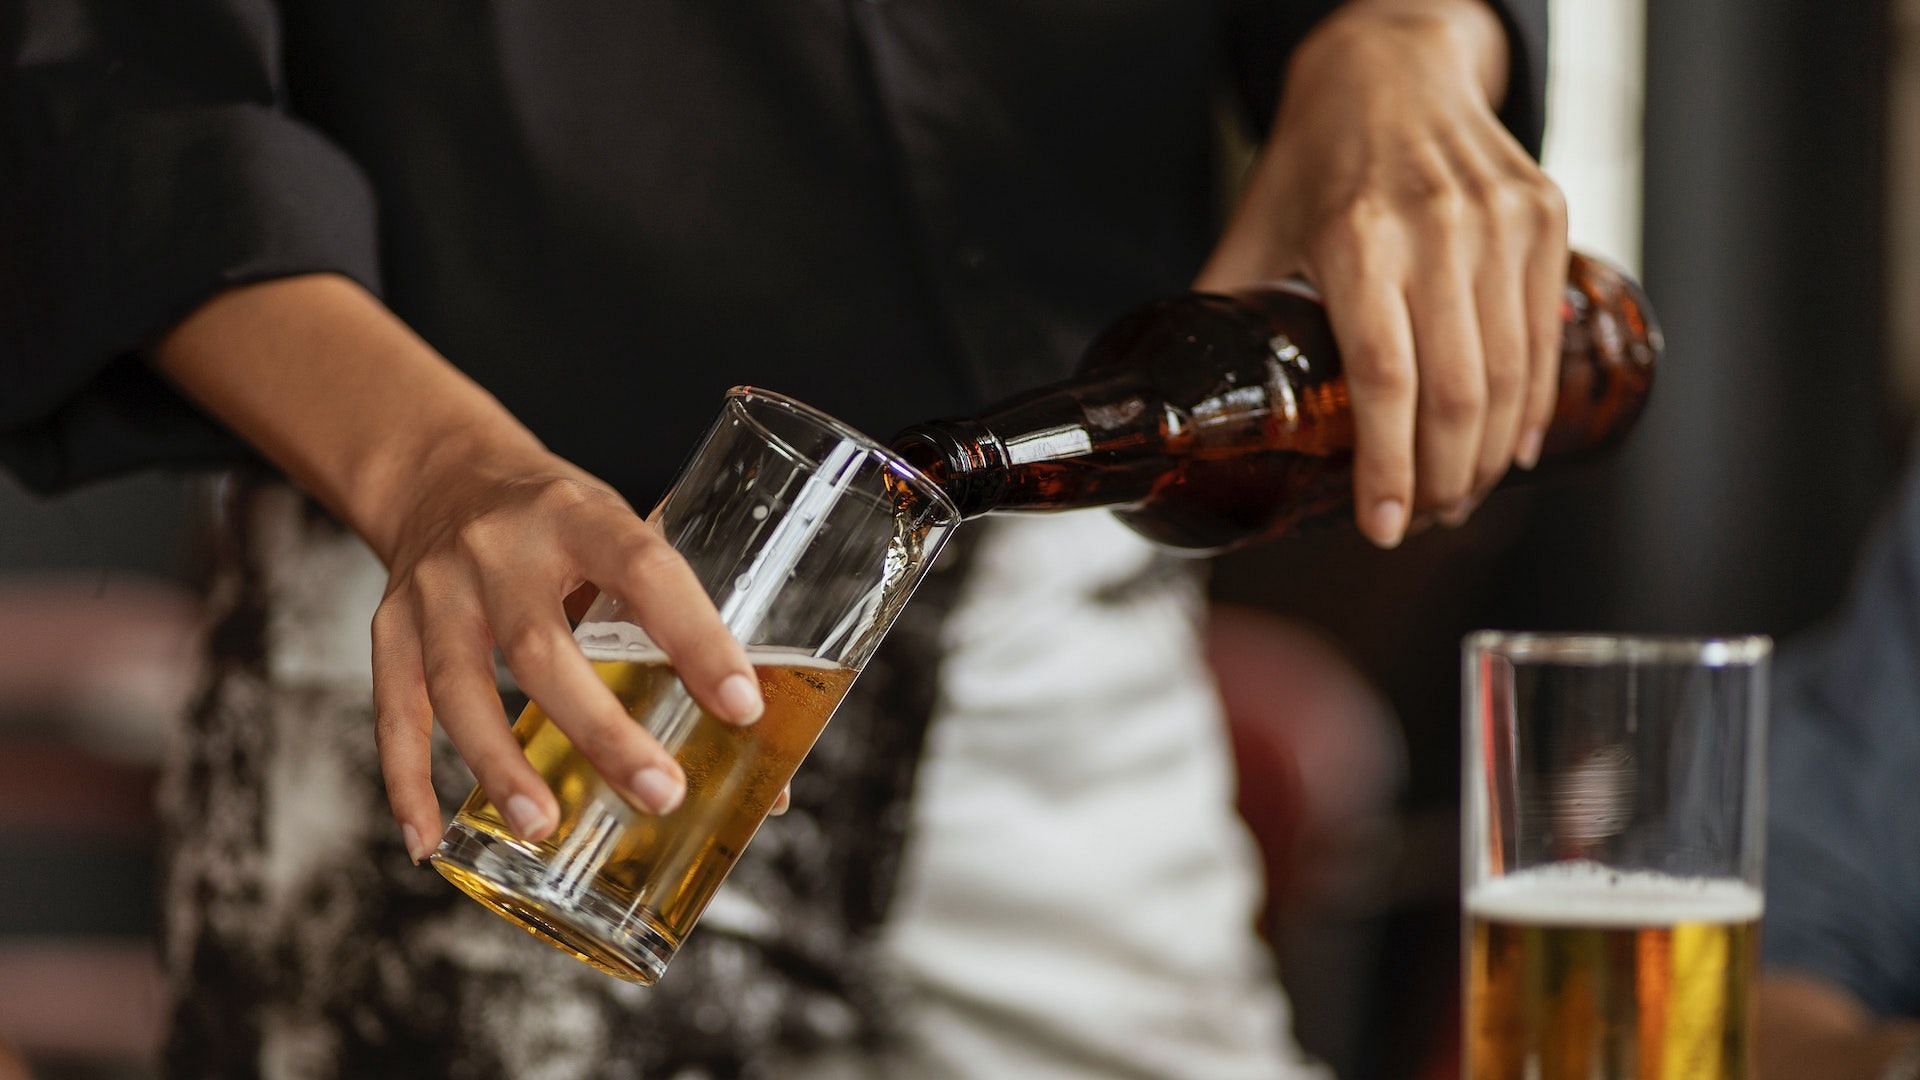 Excess alcohol leads to hypertension. Image via Pexels/Ketut Subiyanto